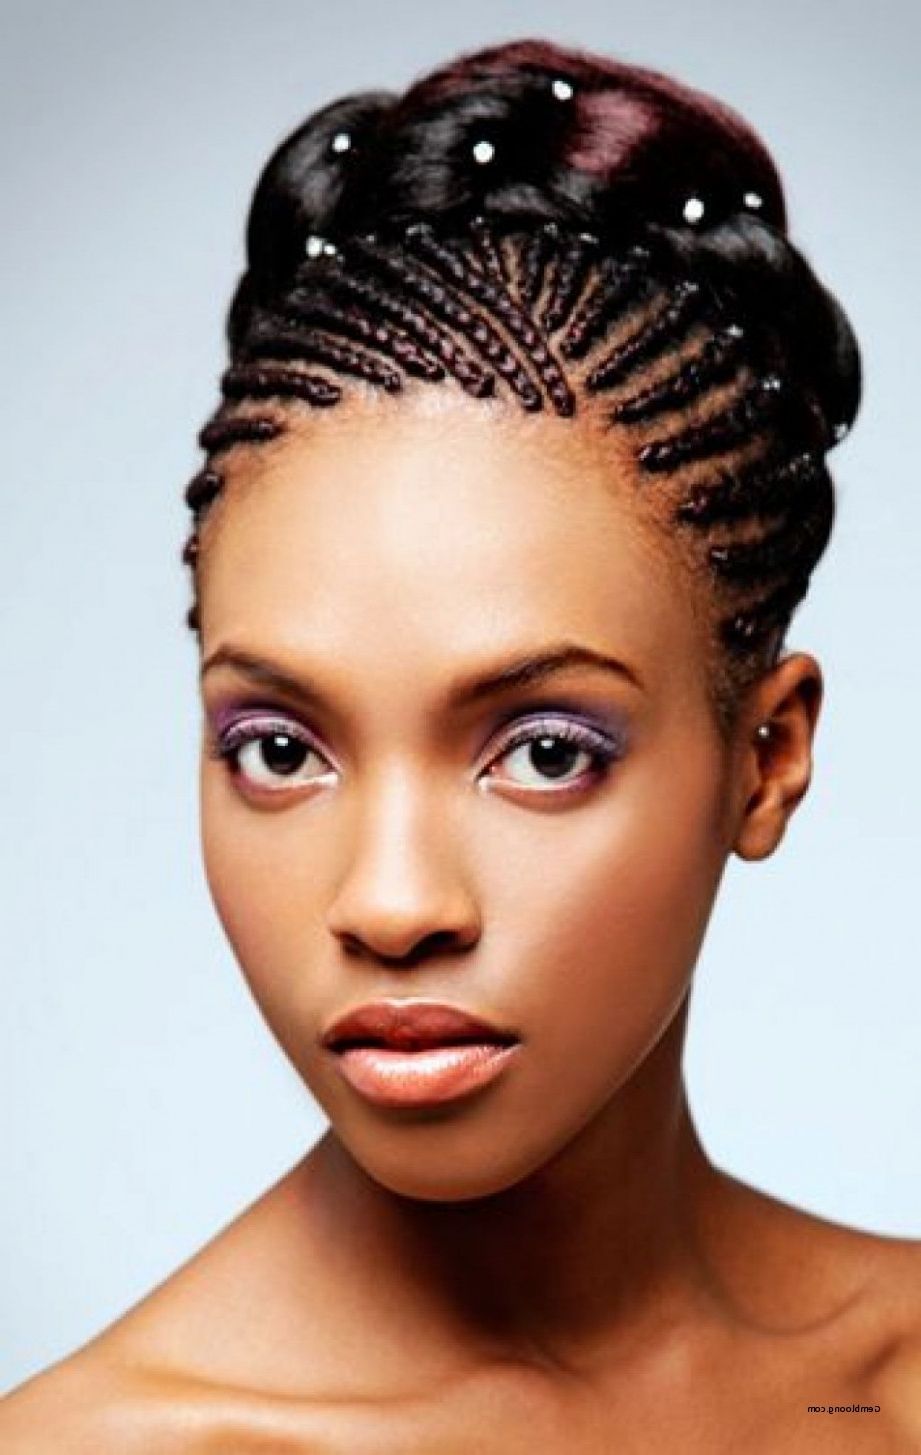 Best Of African Braids Hairstyles For Wedding 2018 – Csdathletics Intended For Most Popular African Wedding Braids Hairstyles (View 2 of 15)